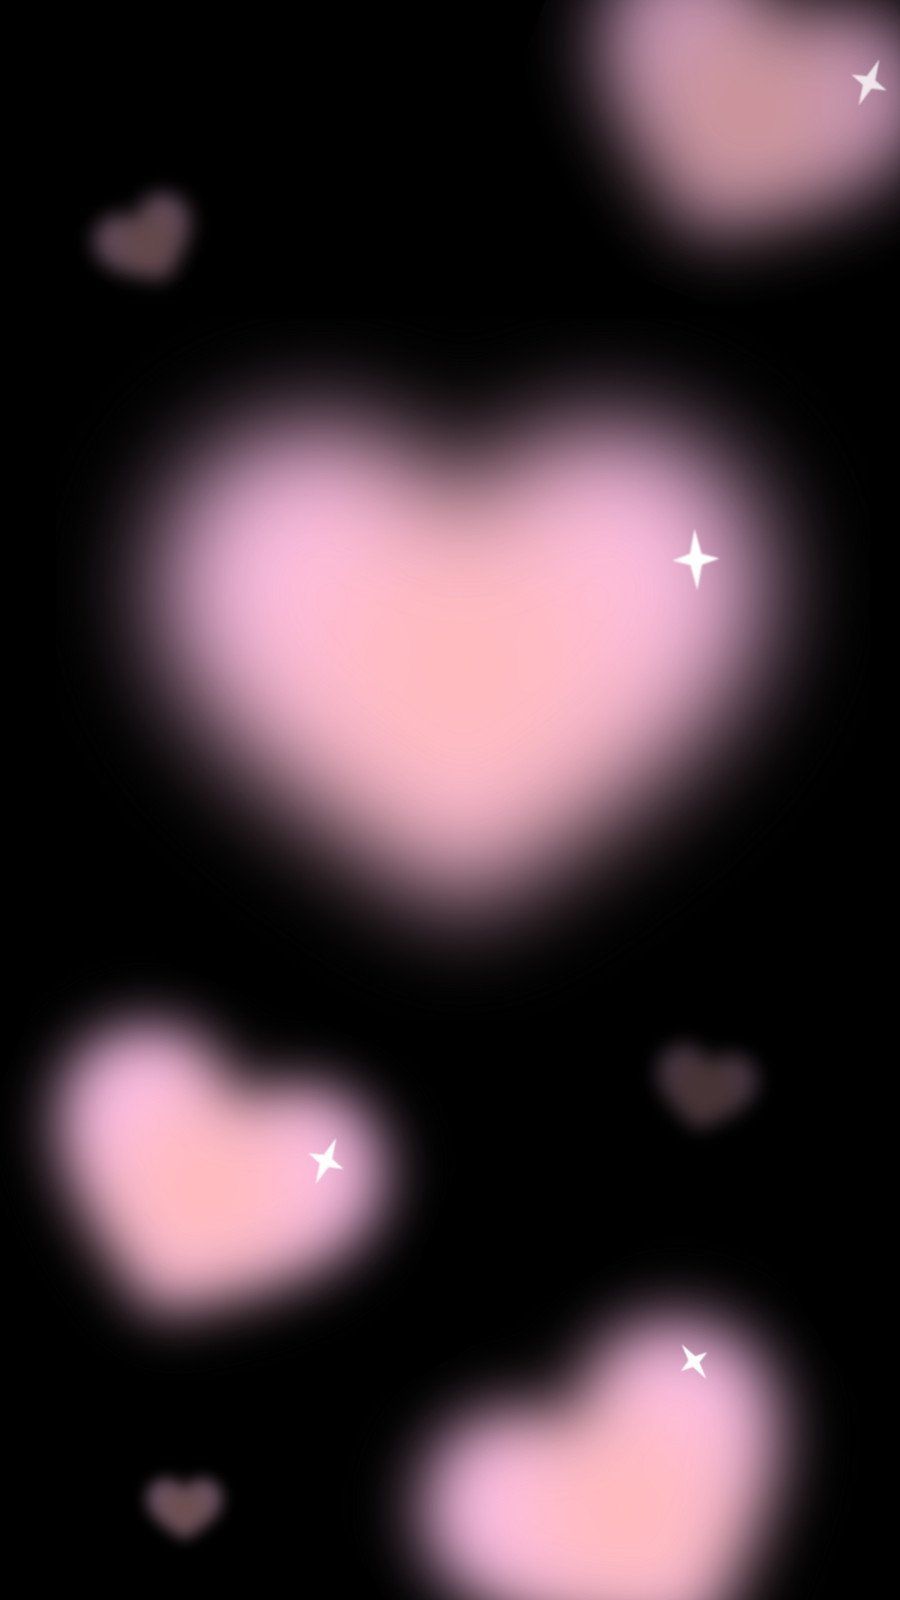 Pink hearts and stars on a black background - Blurry, pink heart